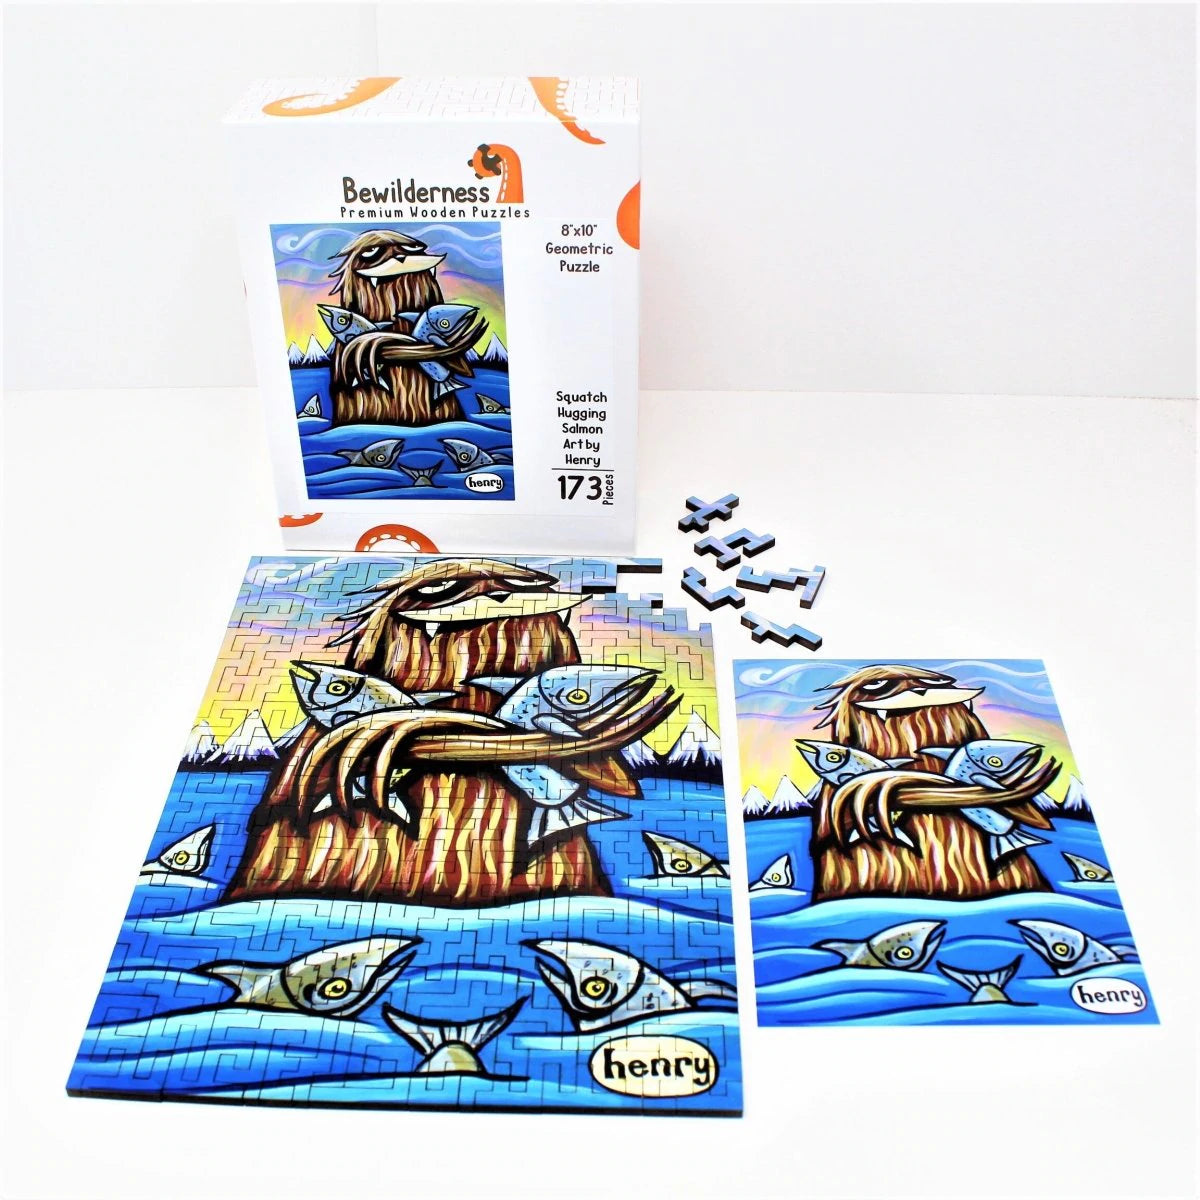 "Sasquatch Hugging Salmon" - 173 Pieces, Geometric Puzzle Featuring the Art of Henry